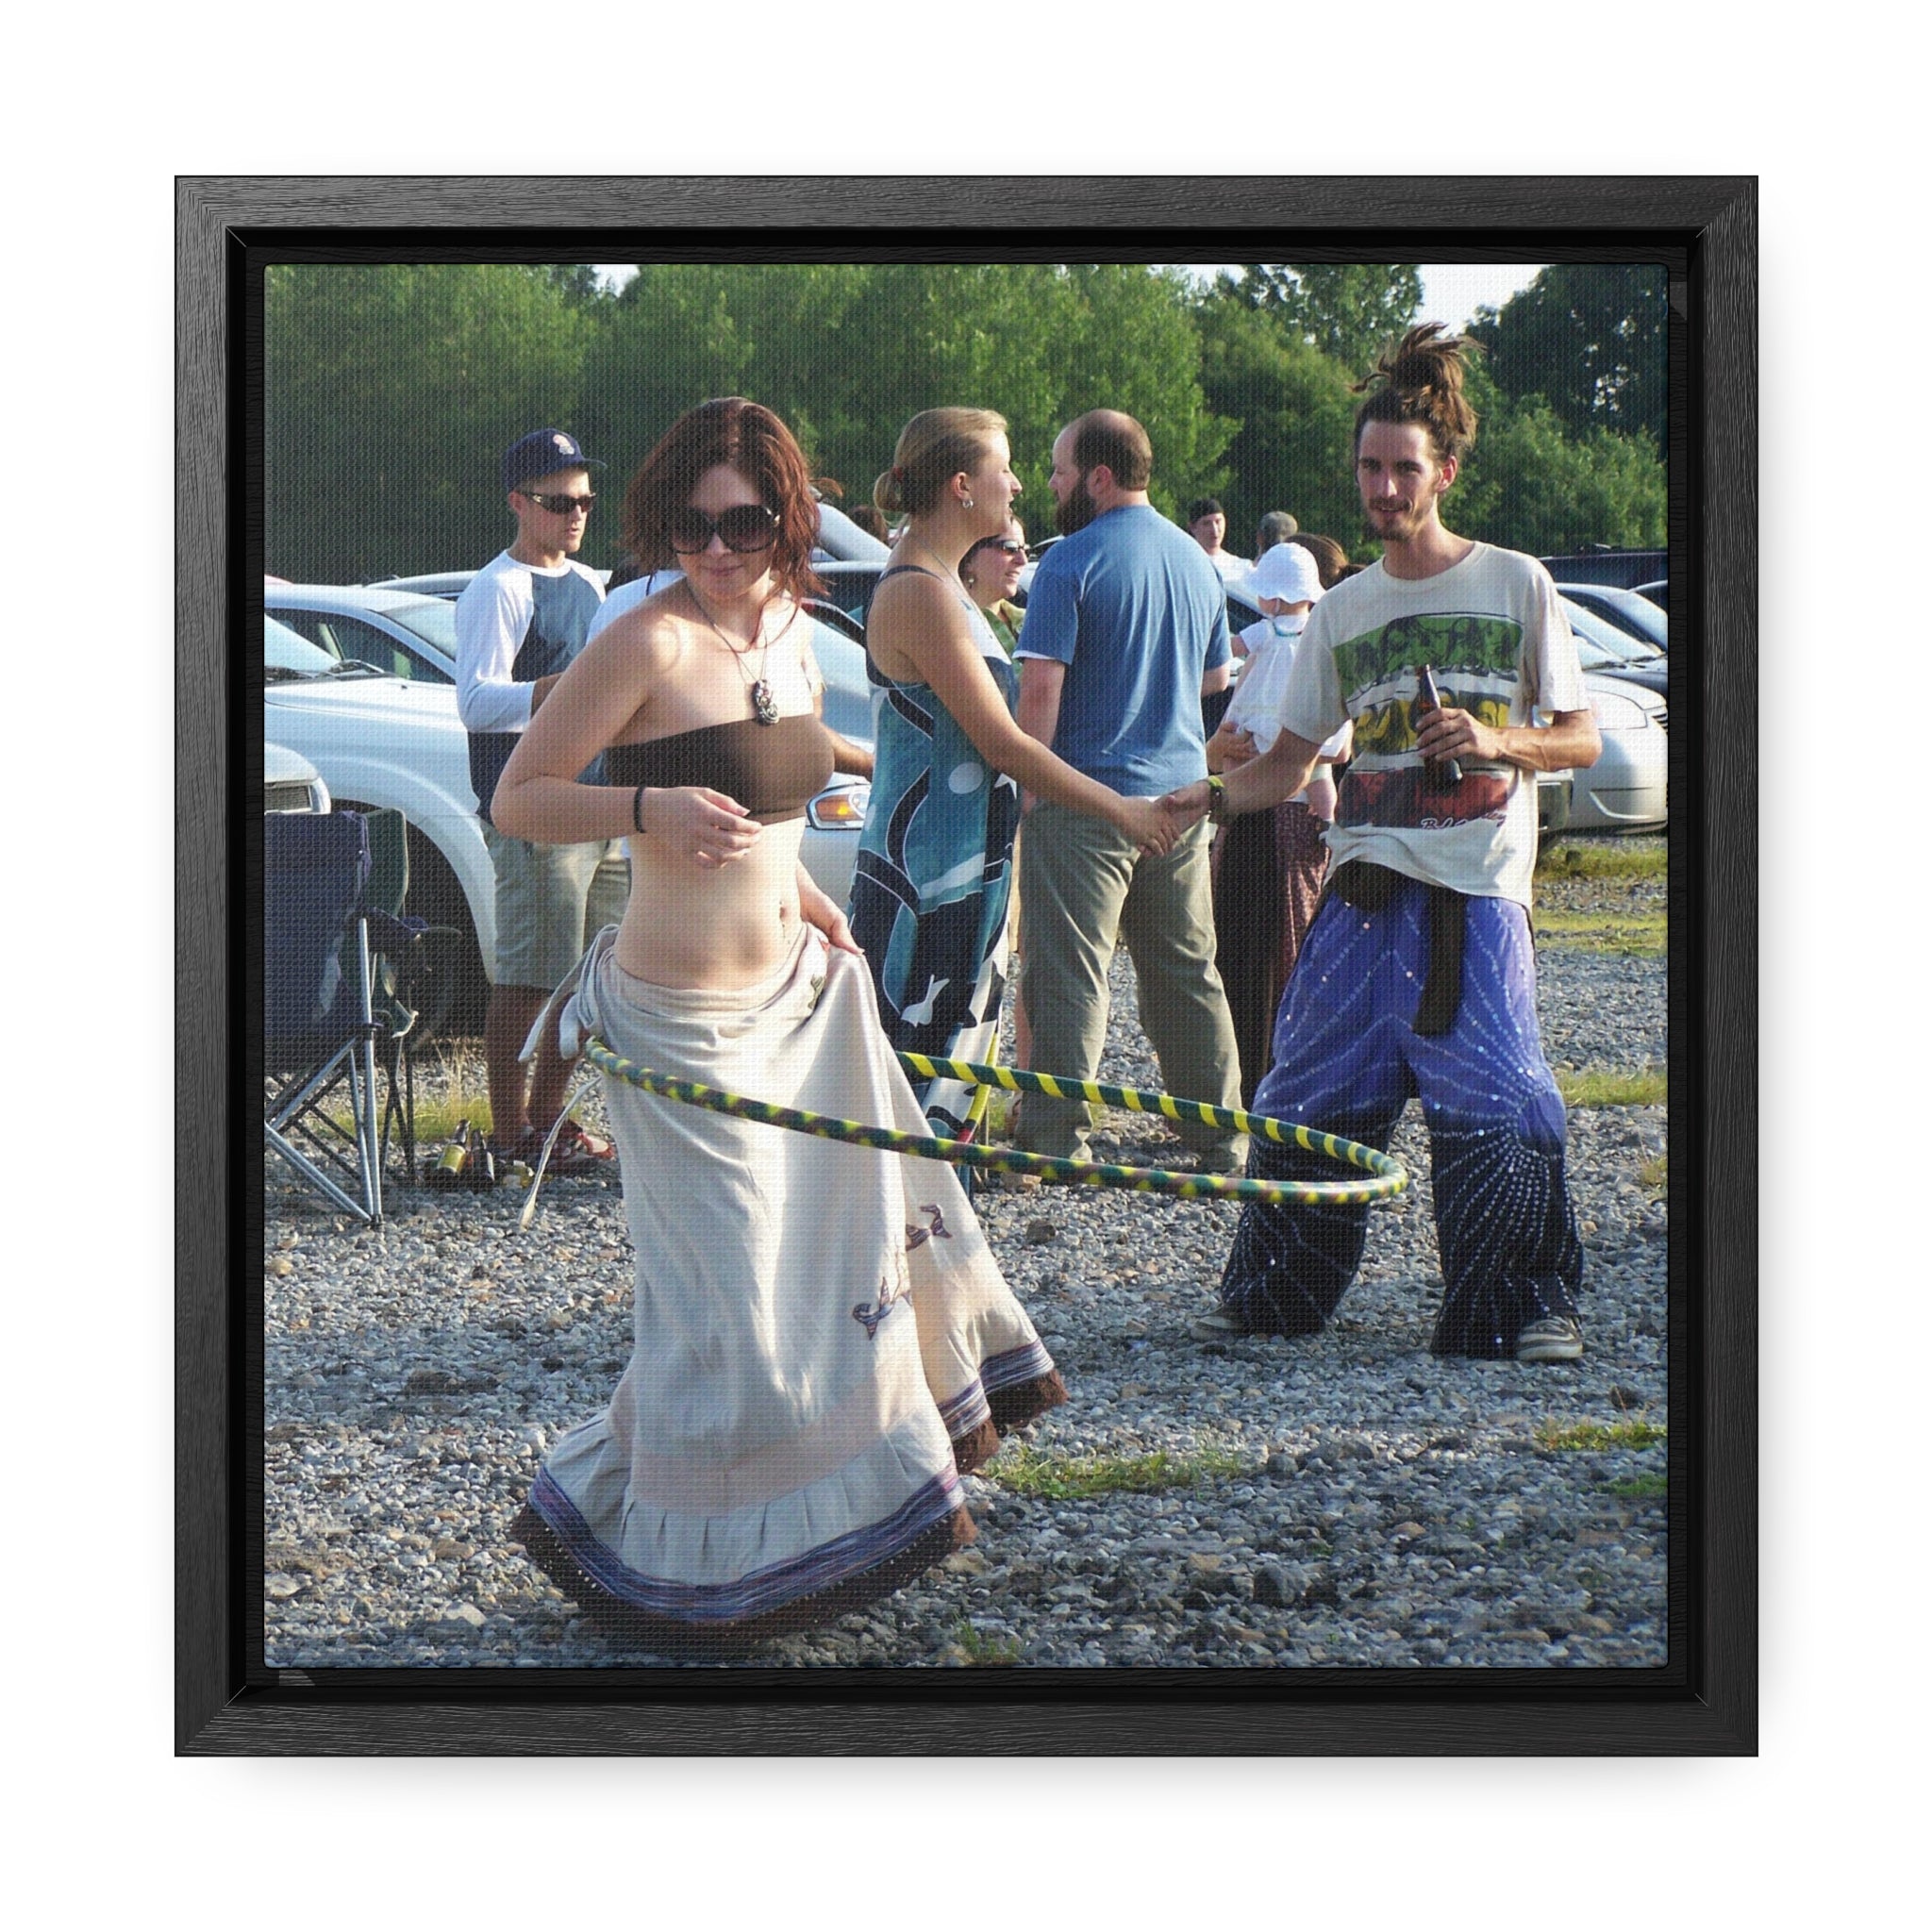 Hula Dancer in the Lot - Gallery Canvas Wraps, Square Frame